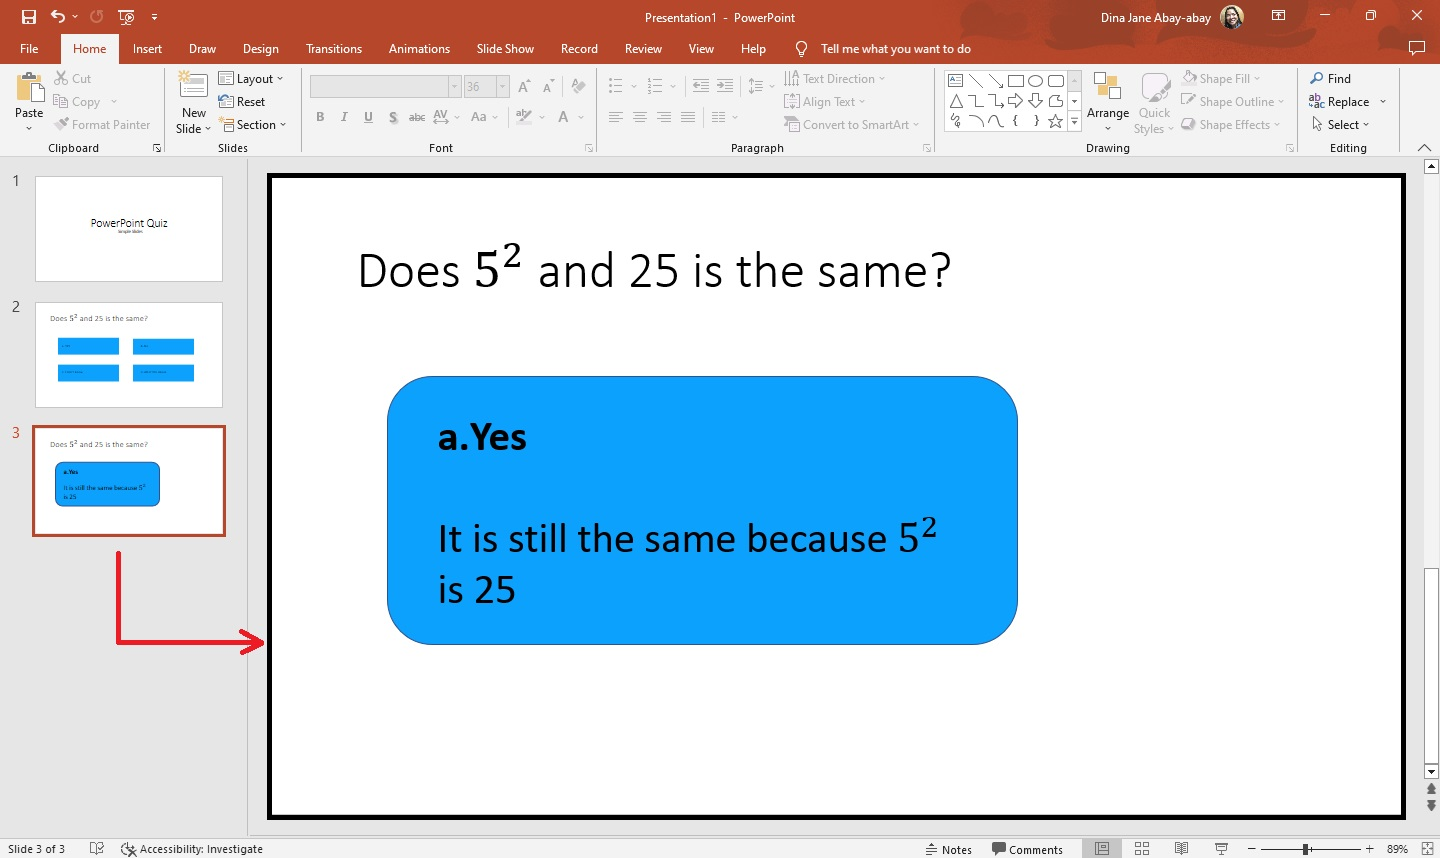 Then type the question and correct answer for your presentation slide.